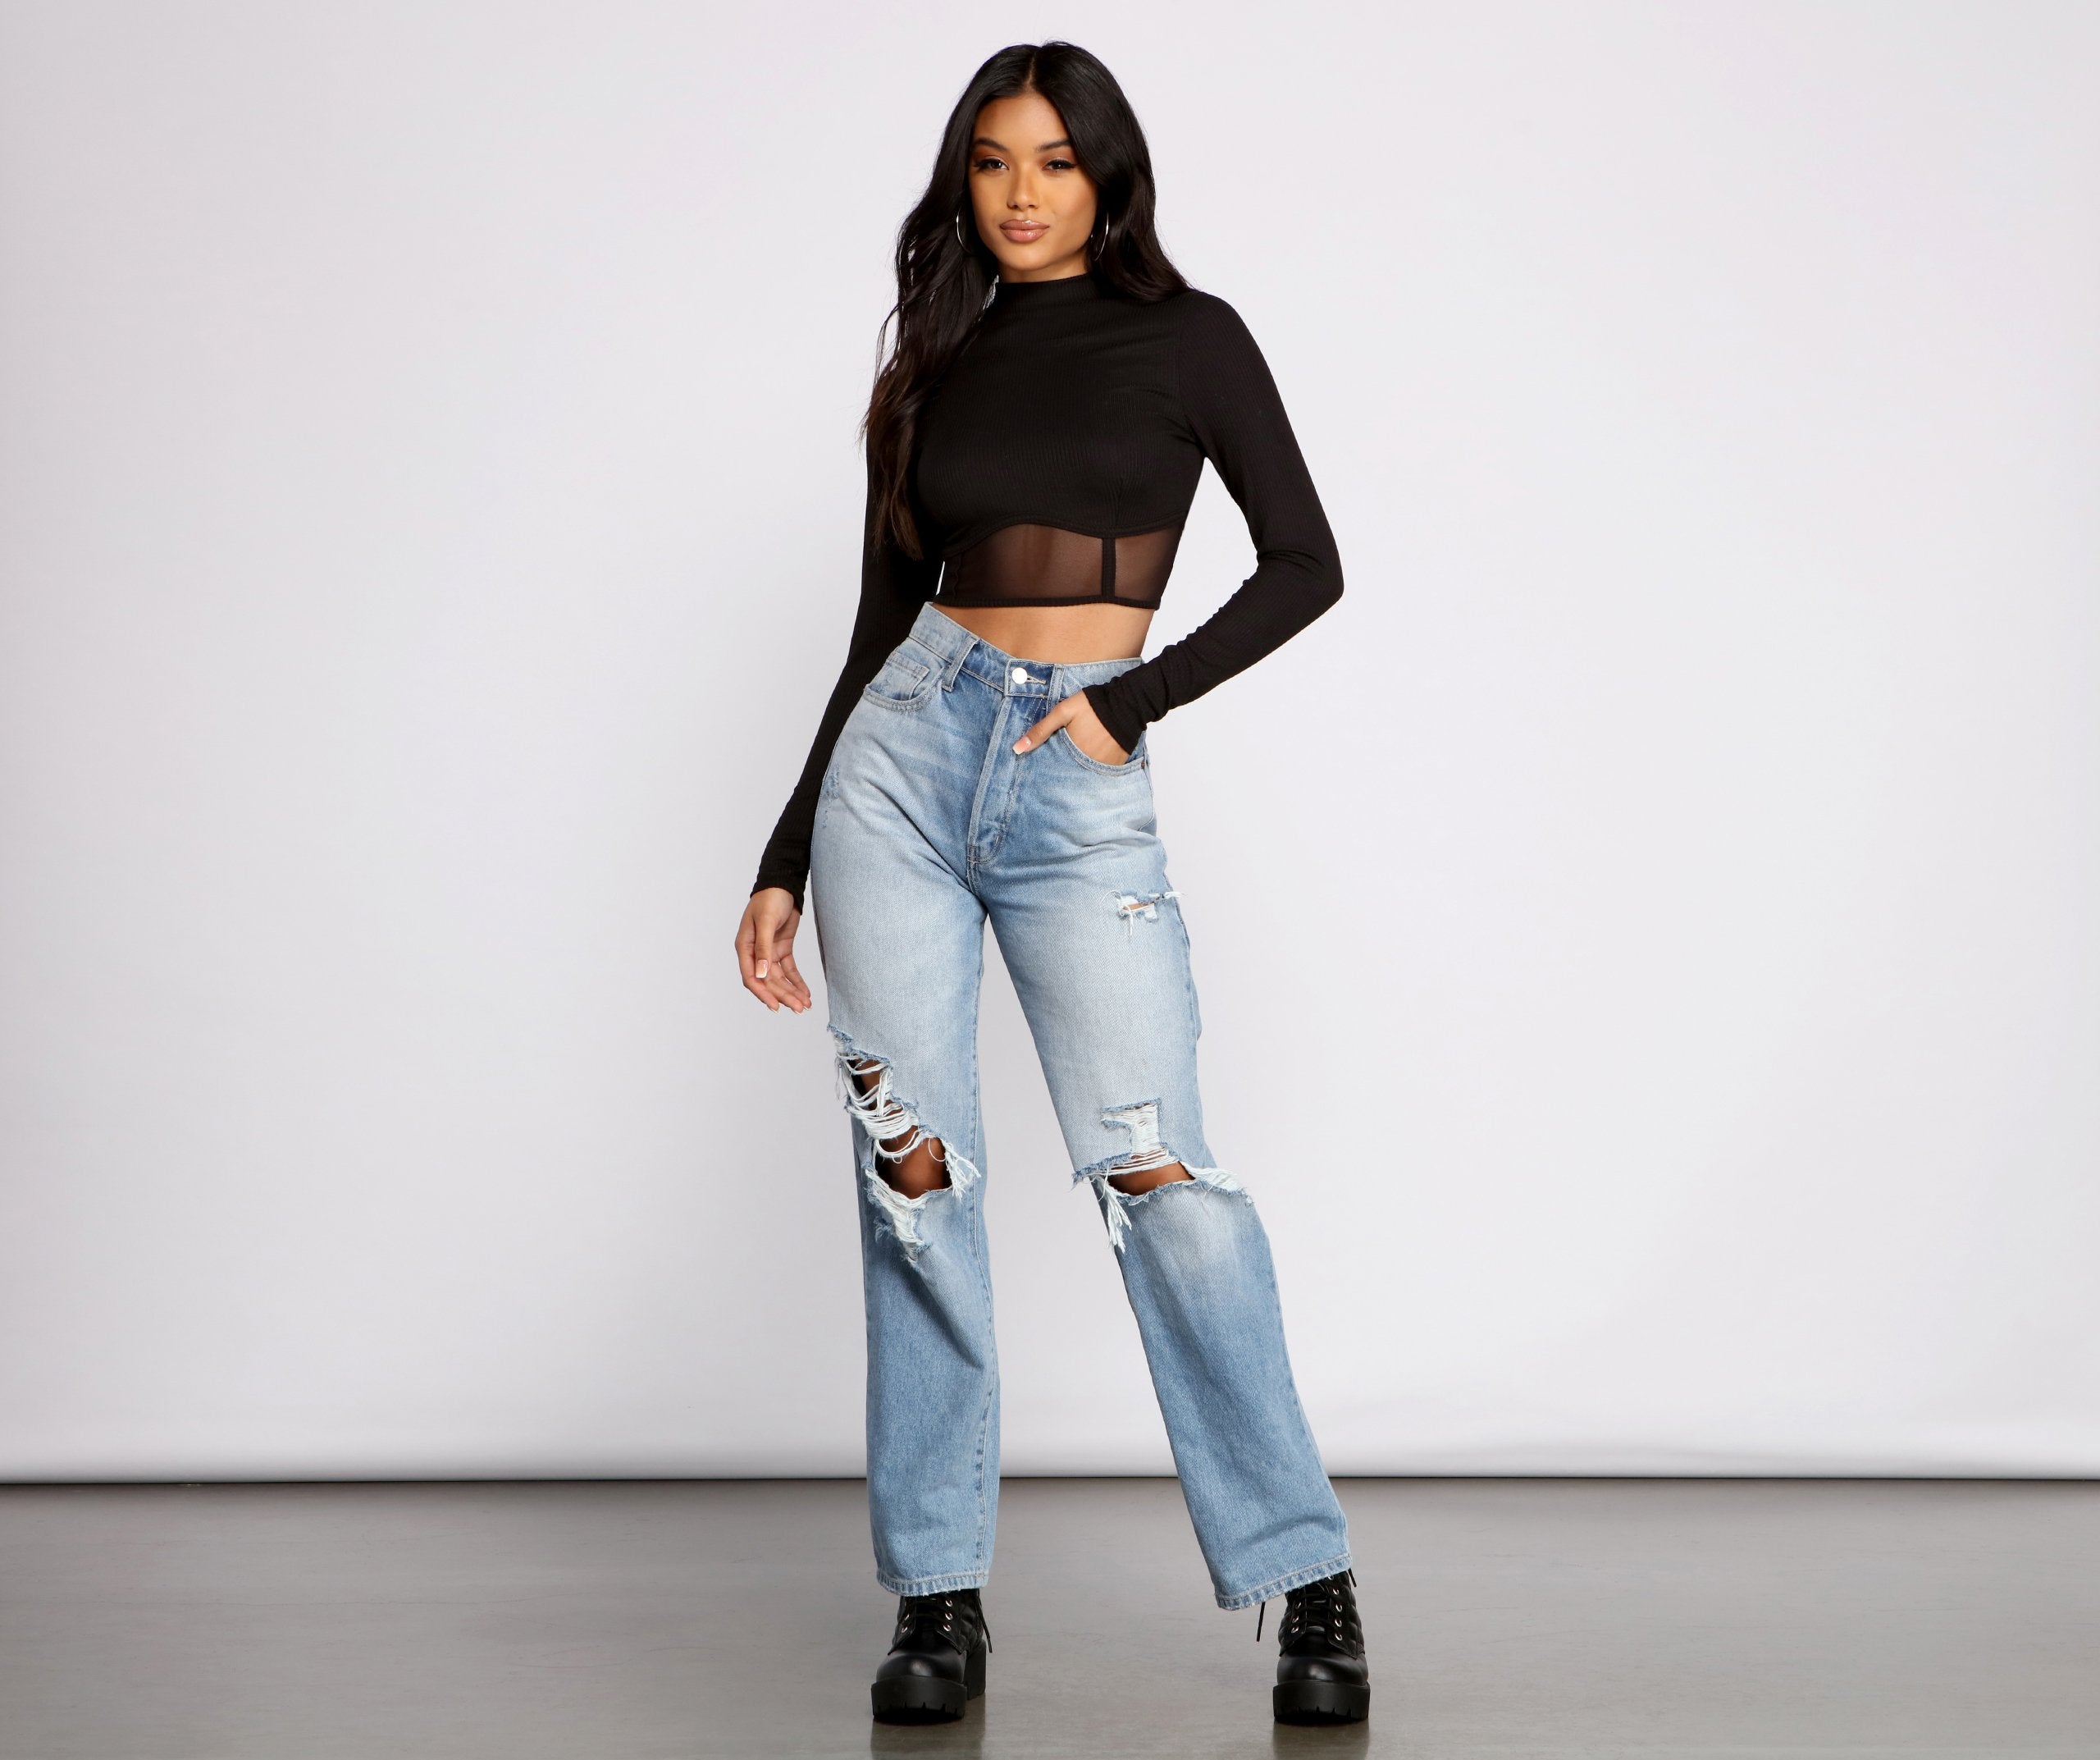 Mesmerize In Mesh Crop Top - Lady Occasions